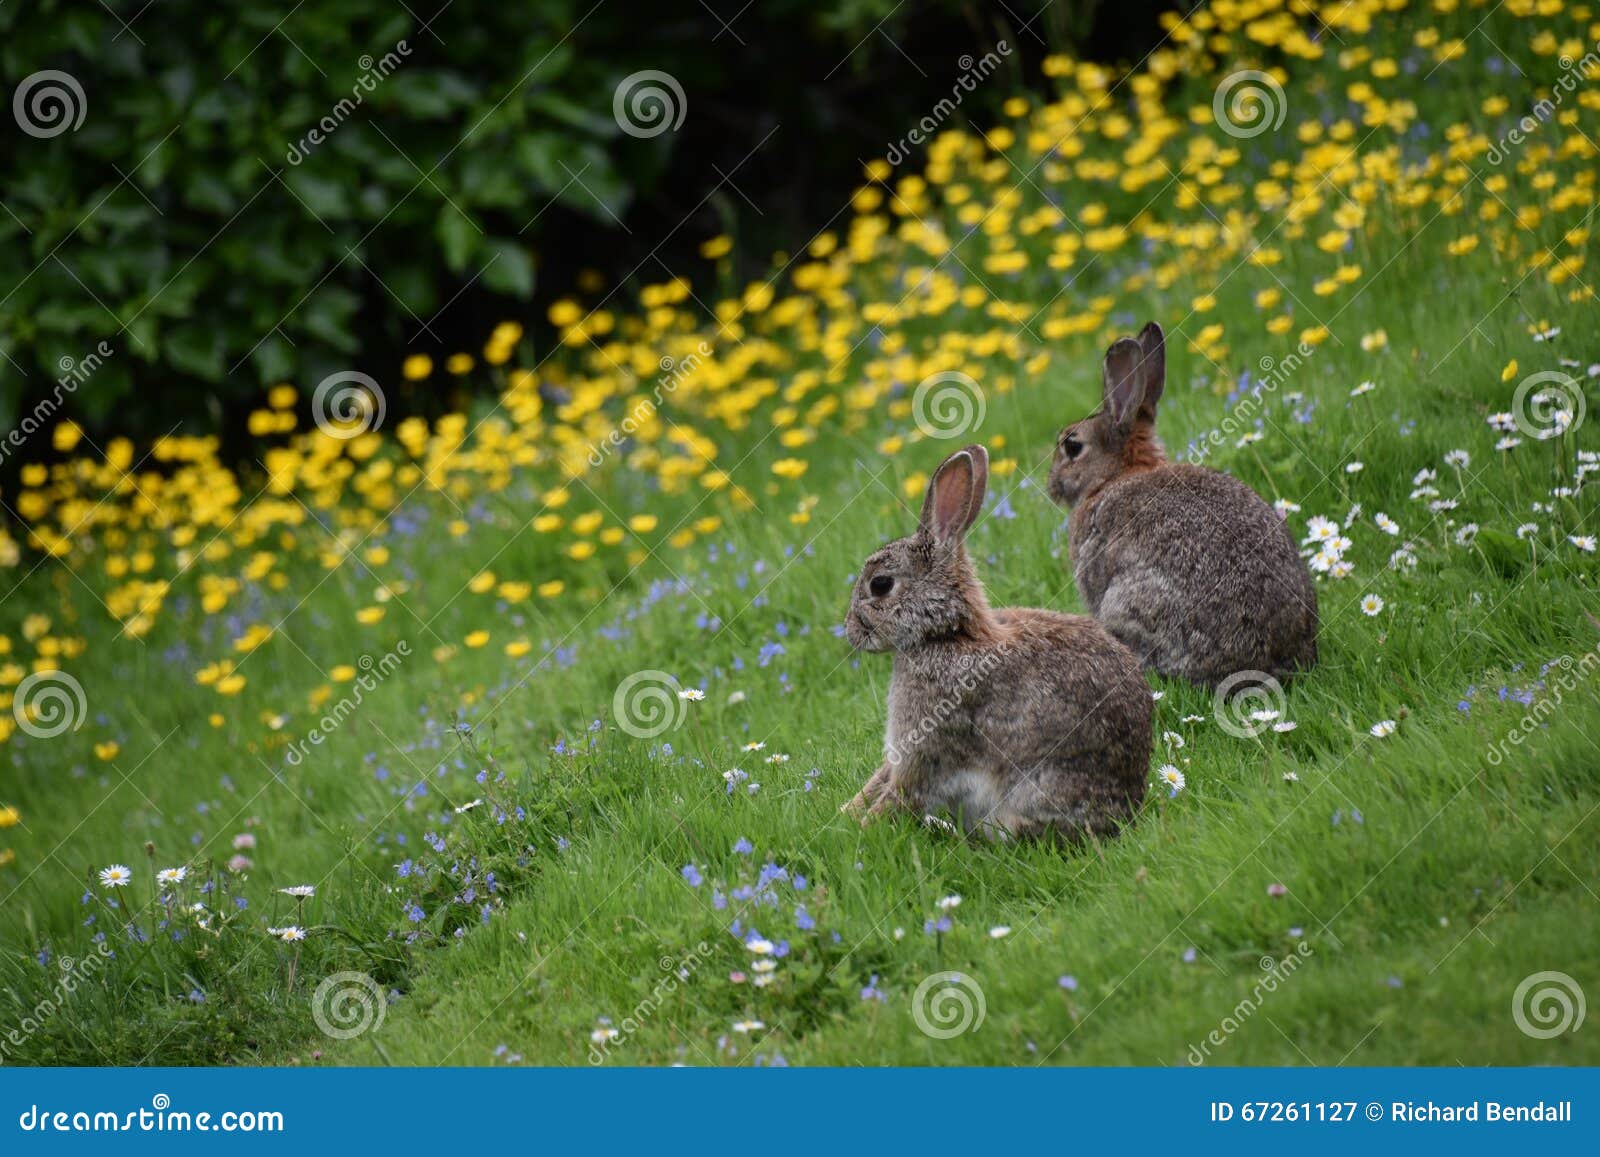 wild rabbits and flowers